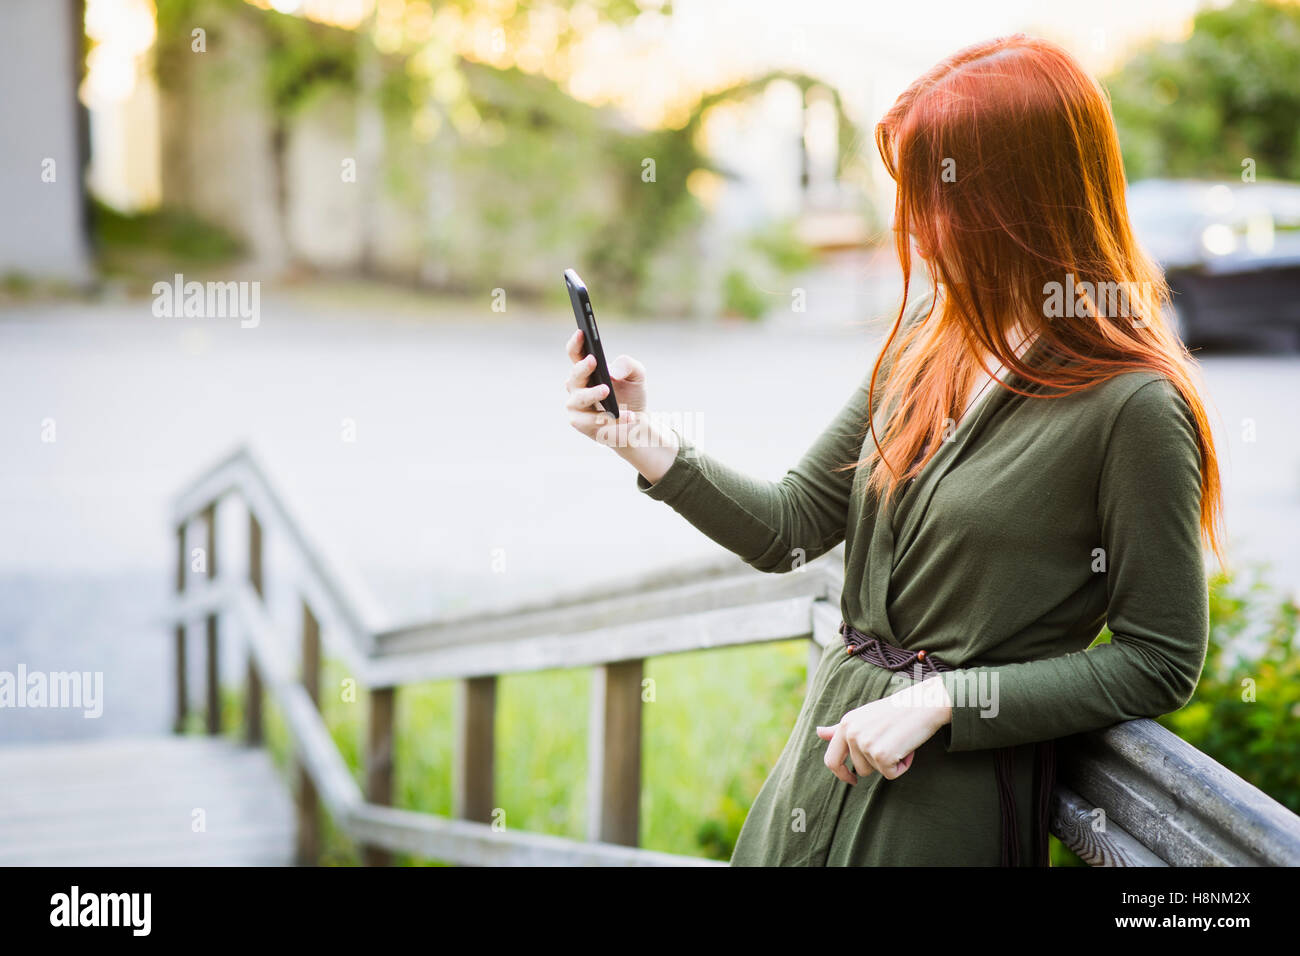 Redhaired woman standing on staircase and using phone Stock Photo